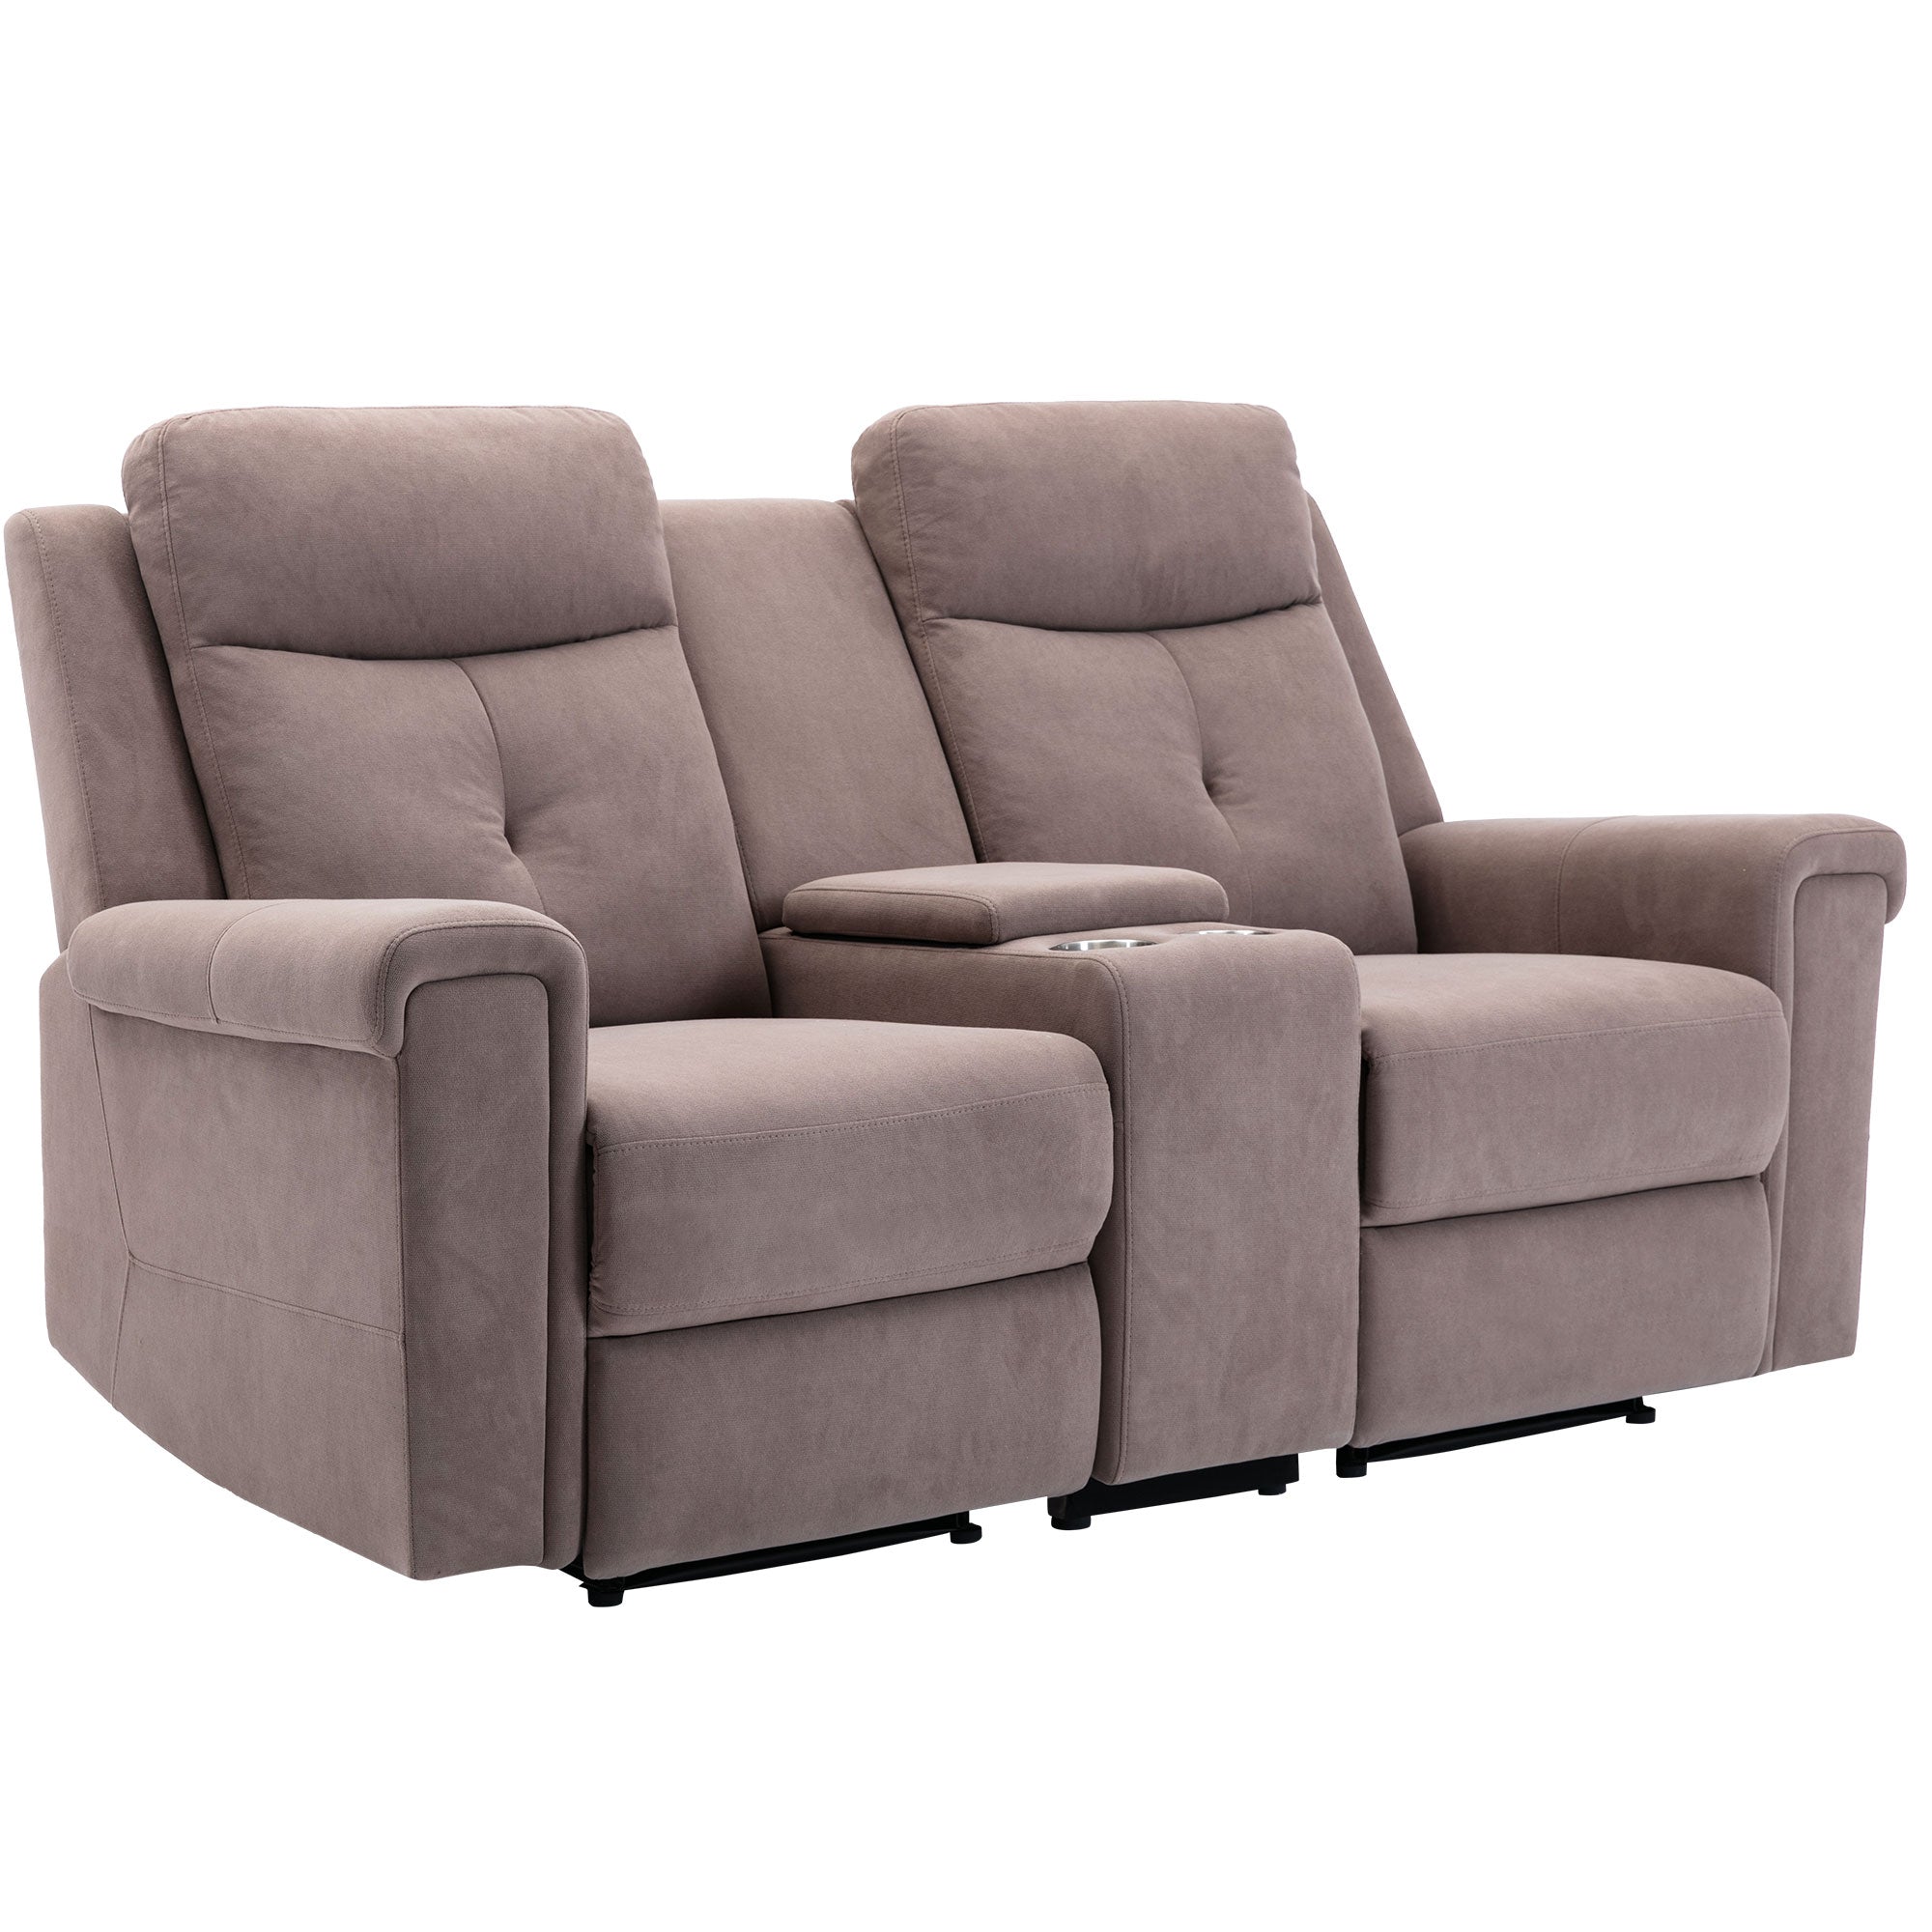 Recliner Couch Polyester Fabric Love-seat Manual Motion Recliner with Storage Box and Two Cup Holders-Boyel Living